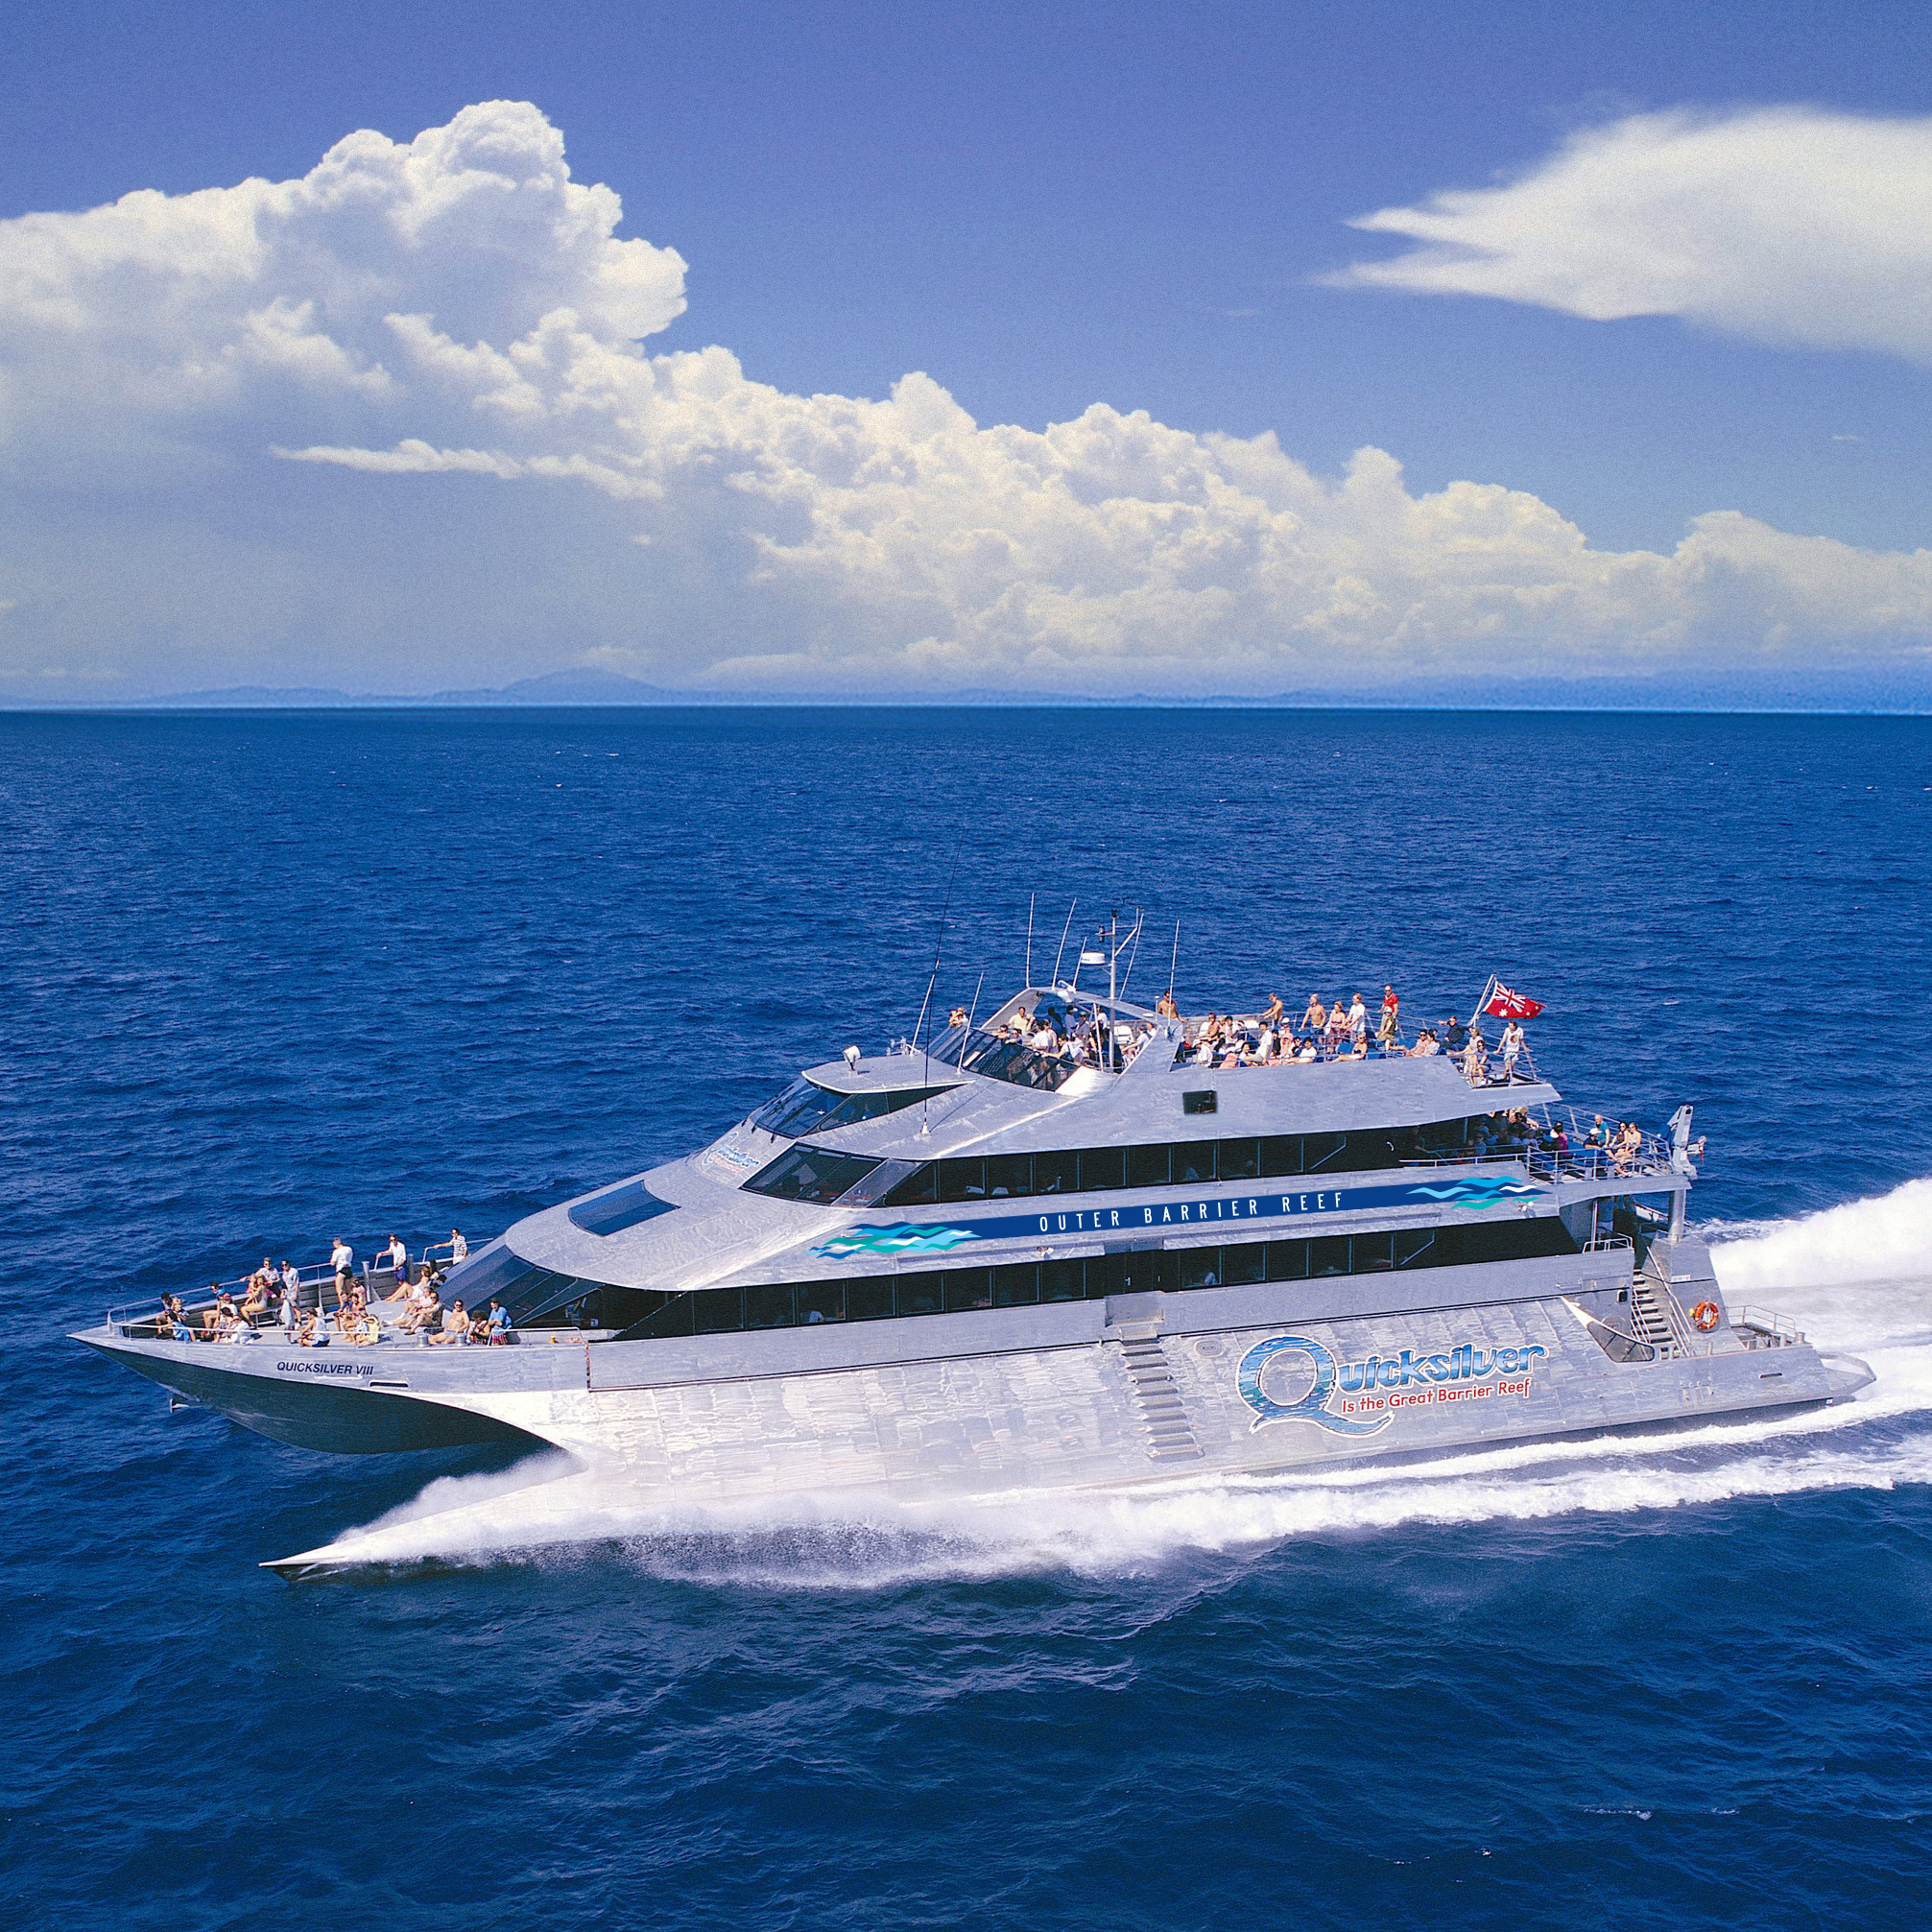 Quicksilver Reef Cruise from Port Douglas